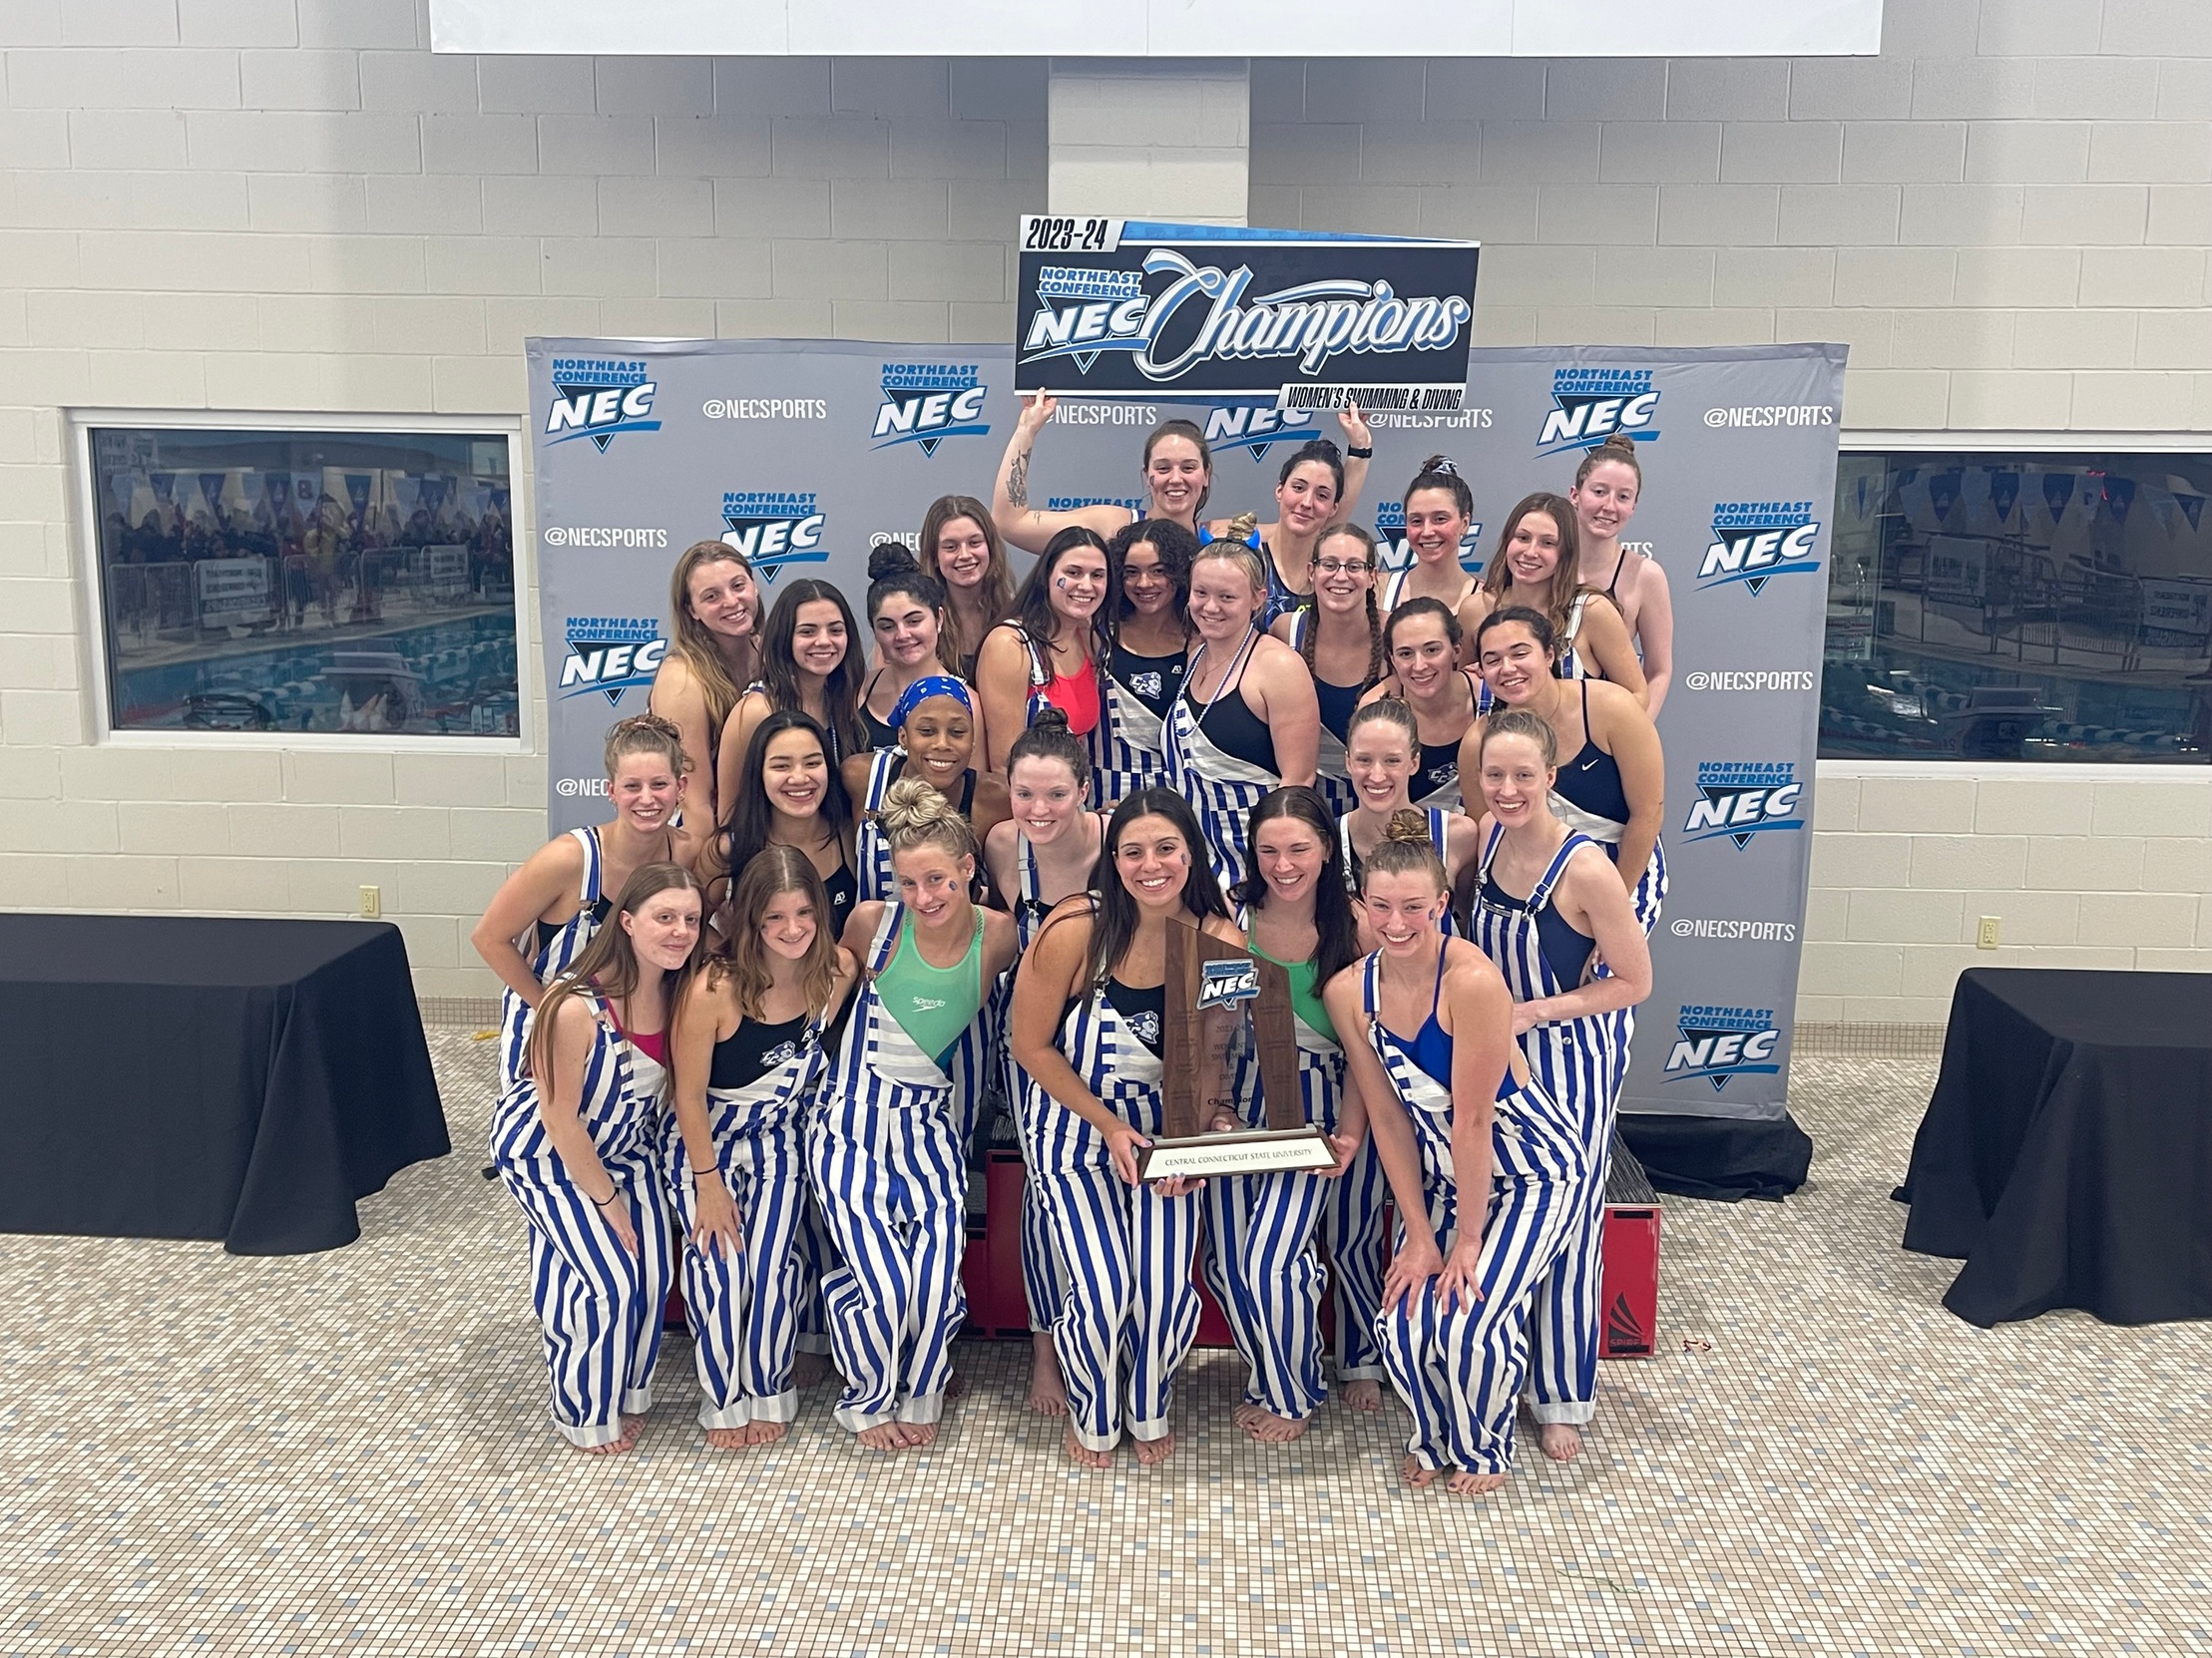 The swimming and diving team captures its second consecutive NEC Swimming & Diving Championship, and eighth all-time, this week in Geneva, OH. (Photo: CCSU Athletics)